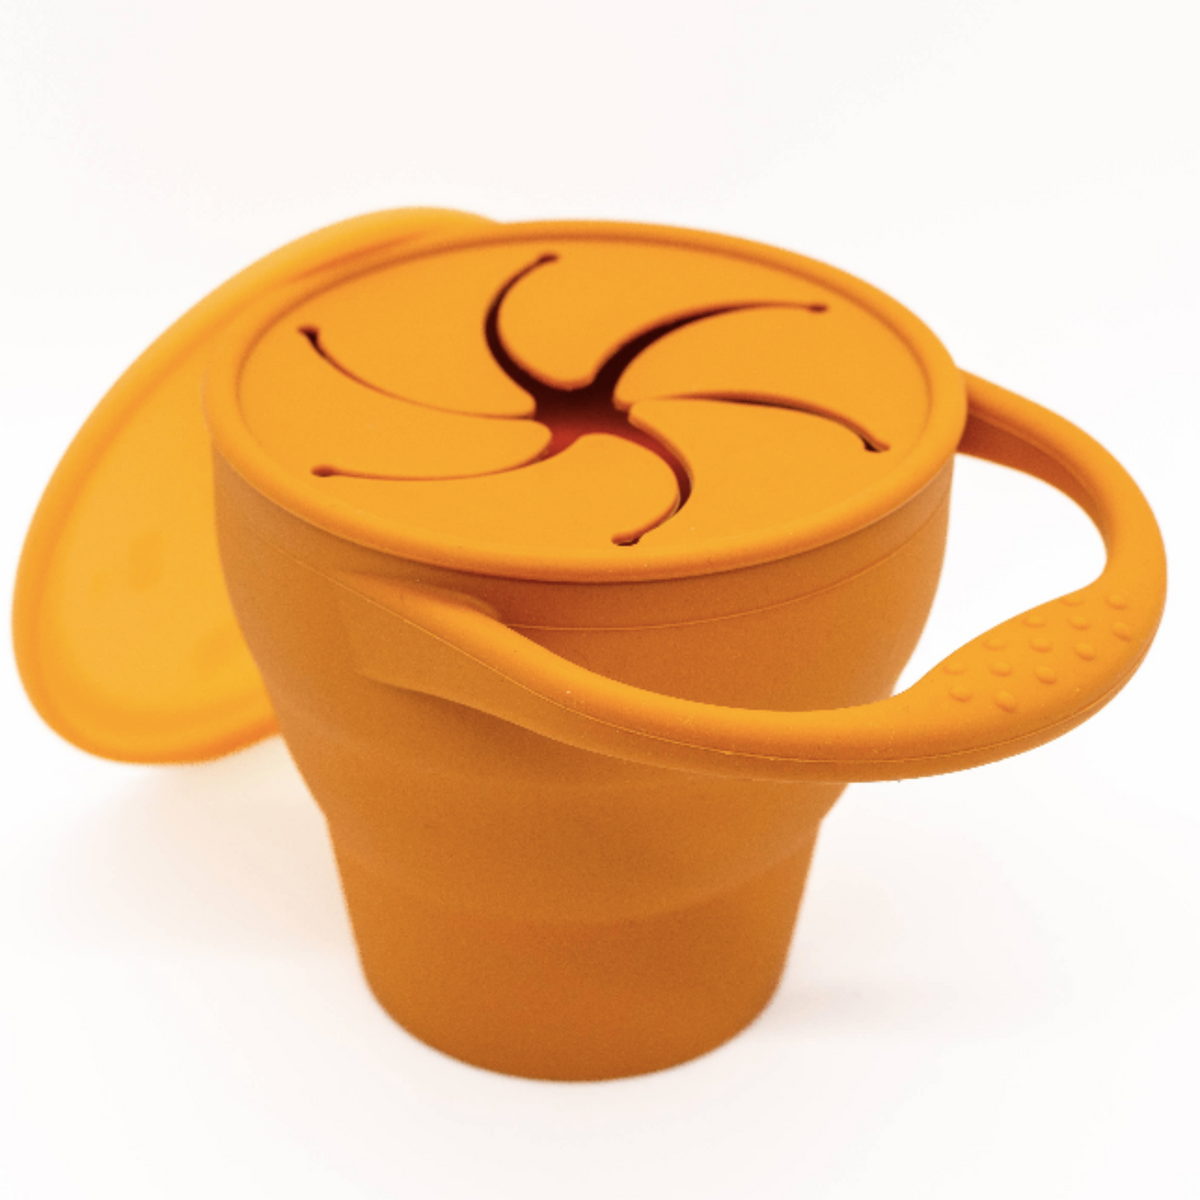 Collapsible Snack Cup with Lid: Sunshine Orange